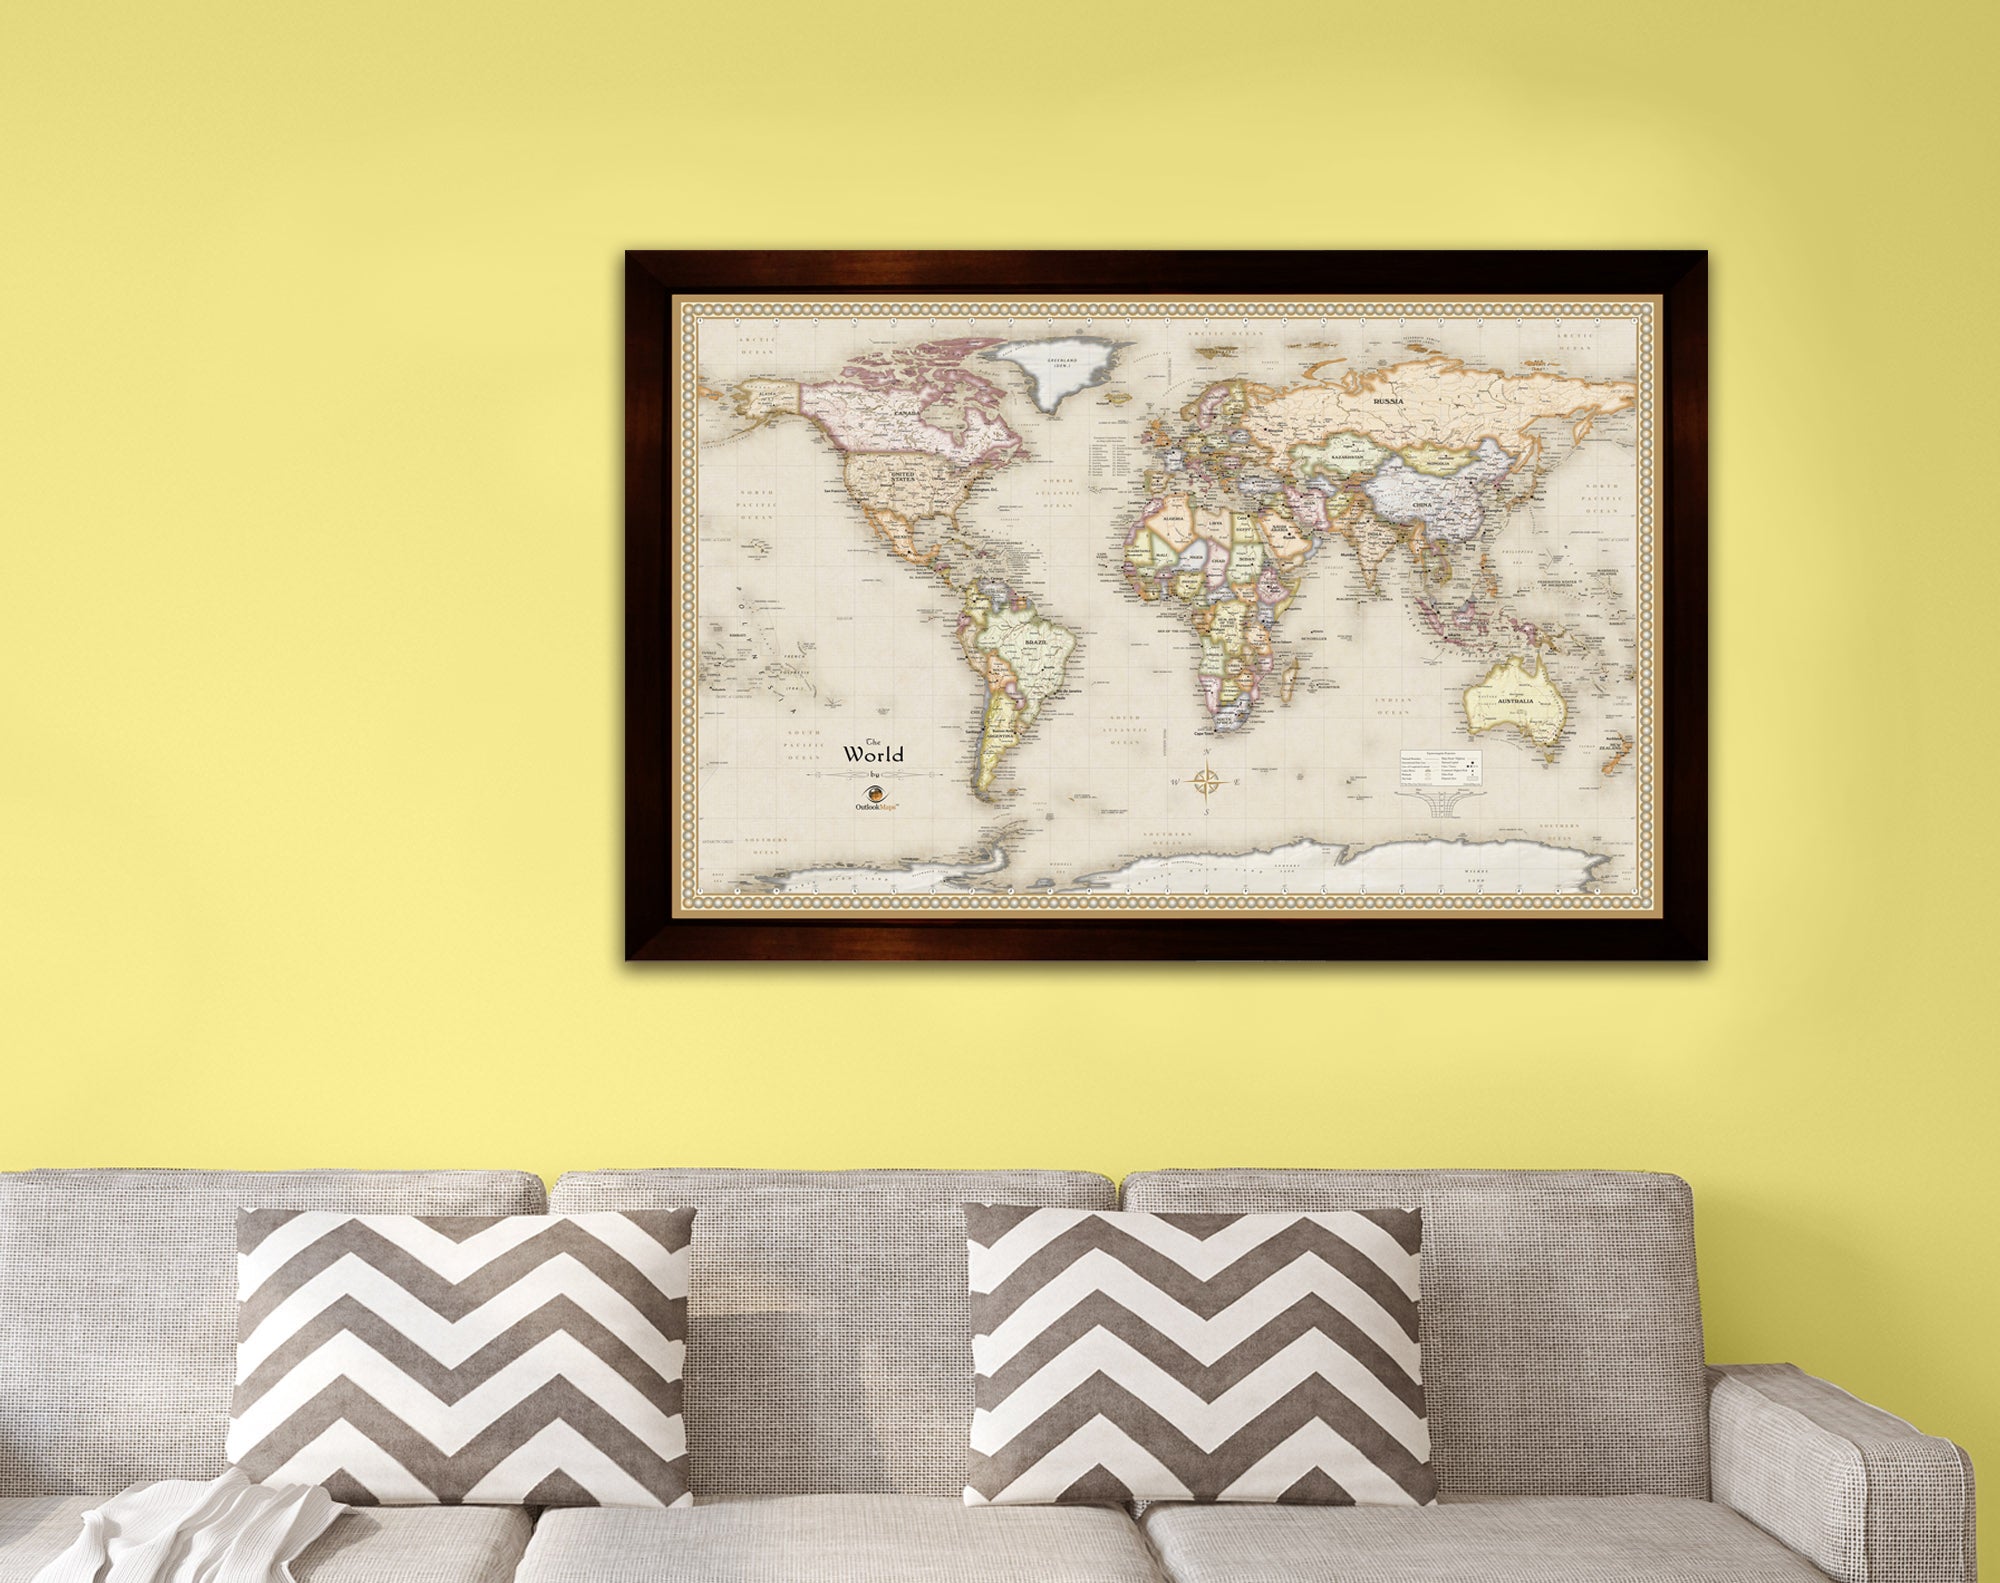 Framed Push Pin Travel Maps - Small Business - Free Shipping 